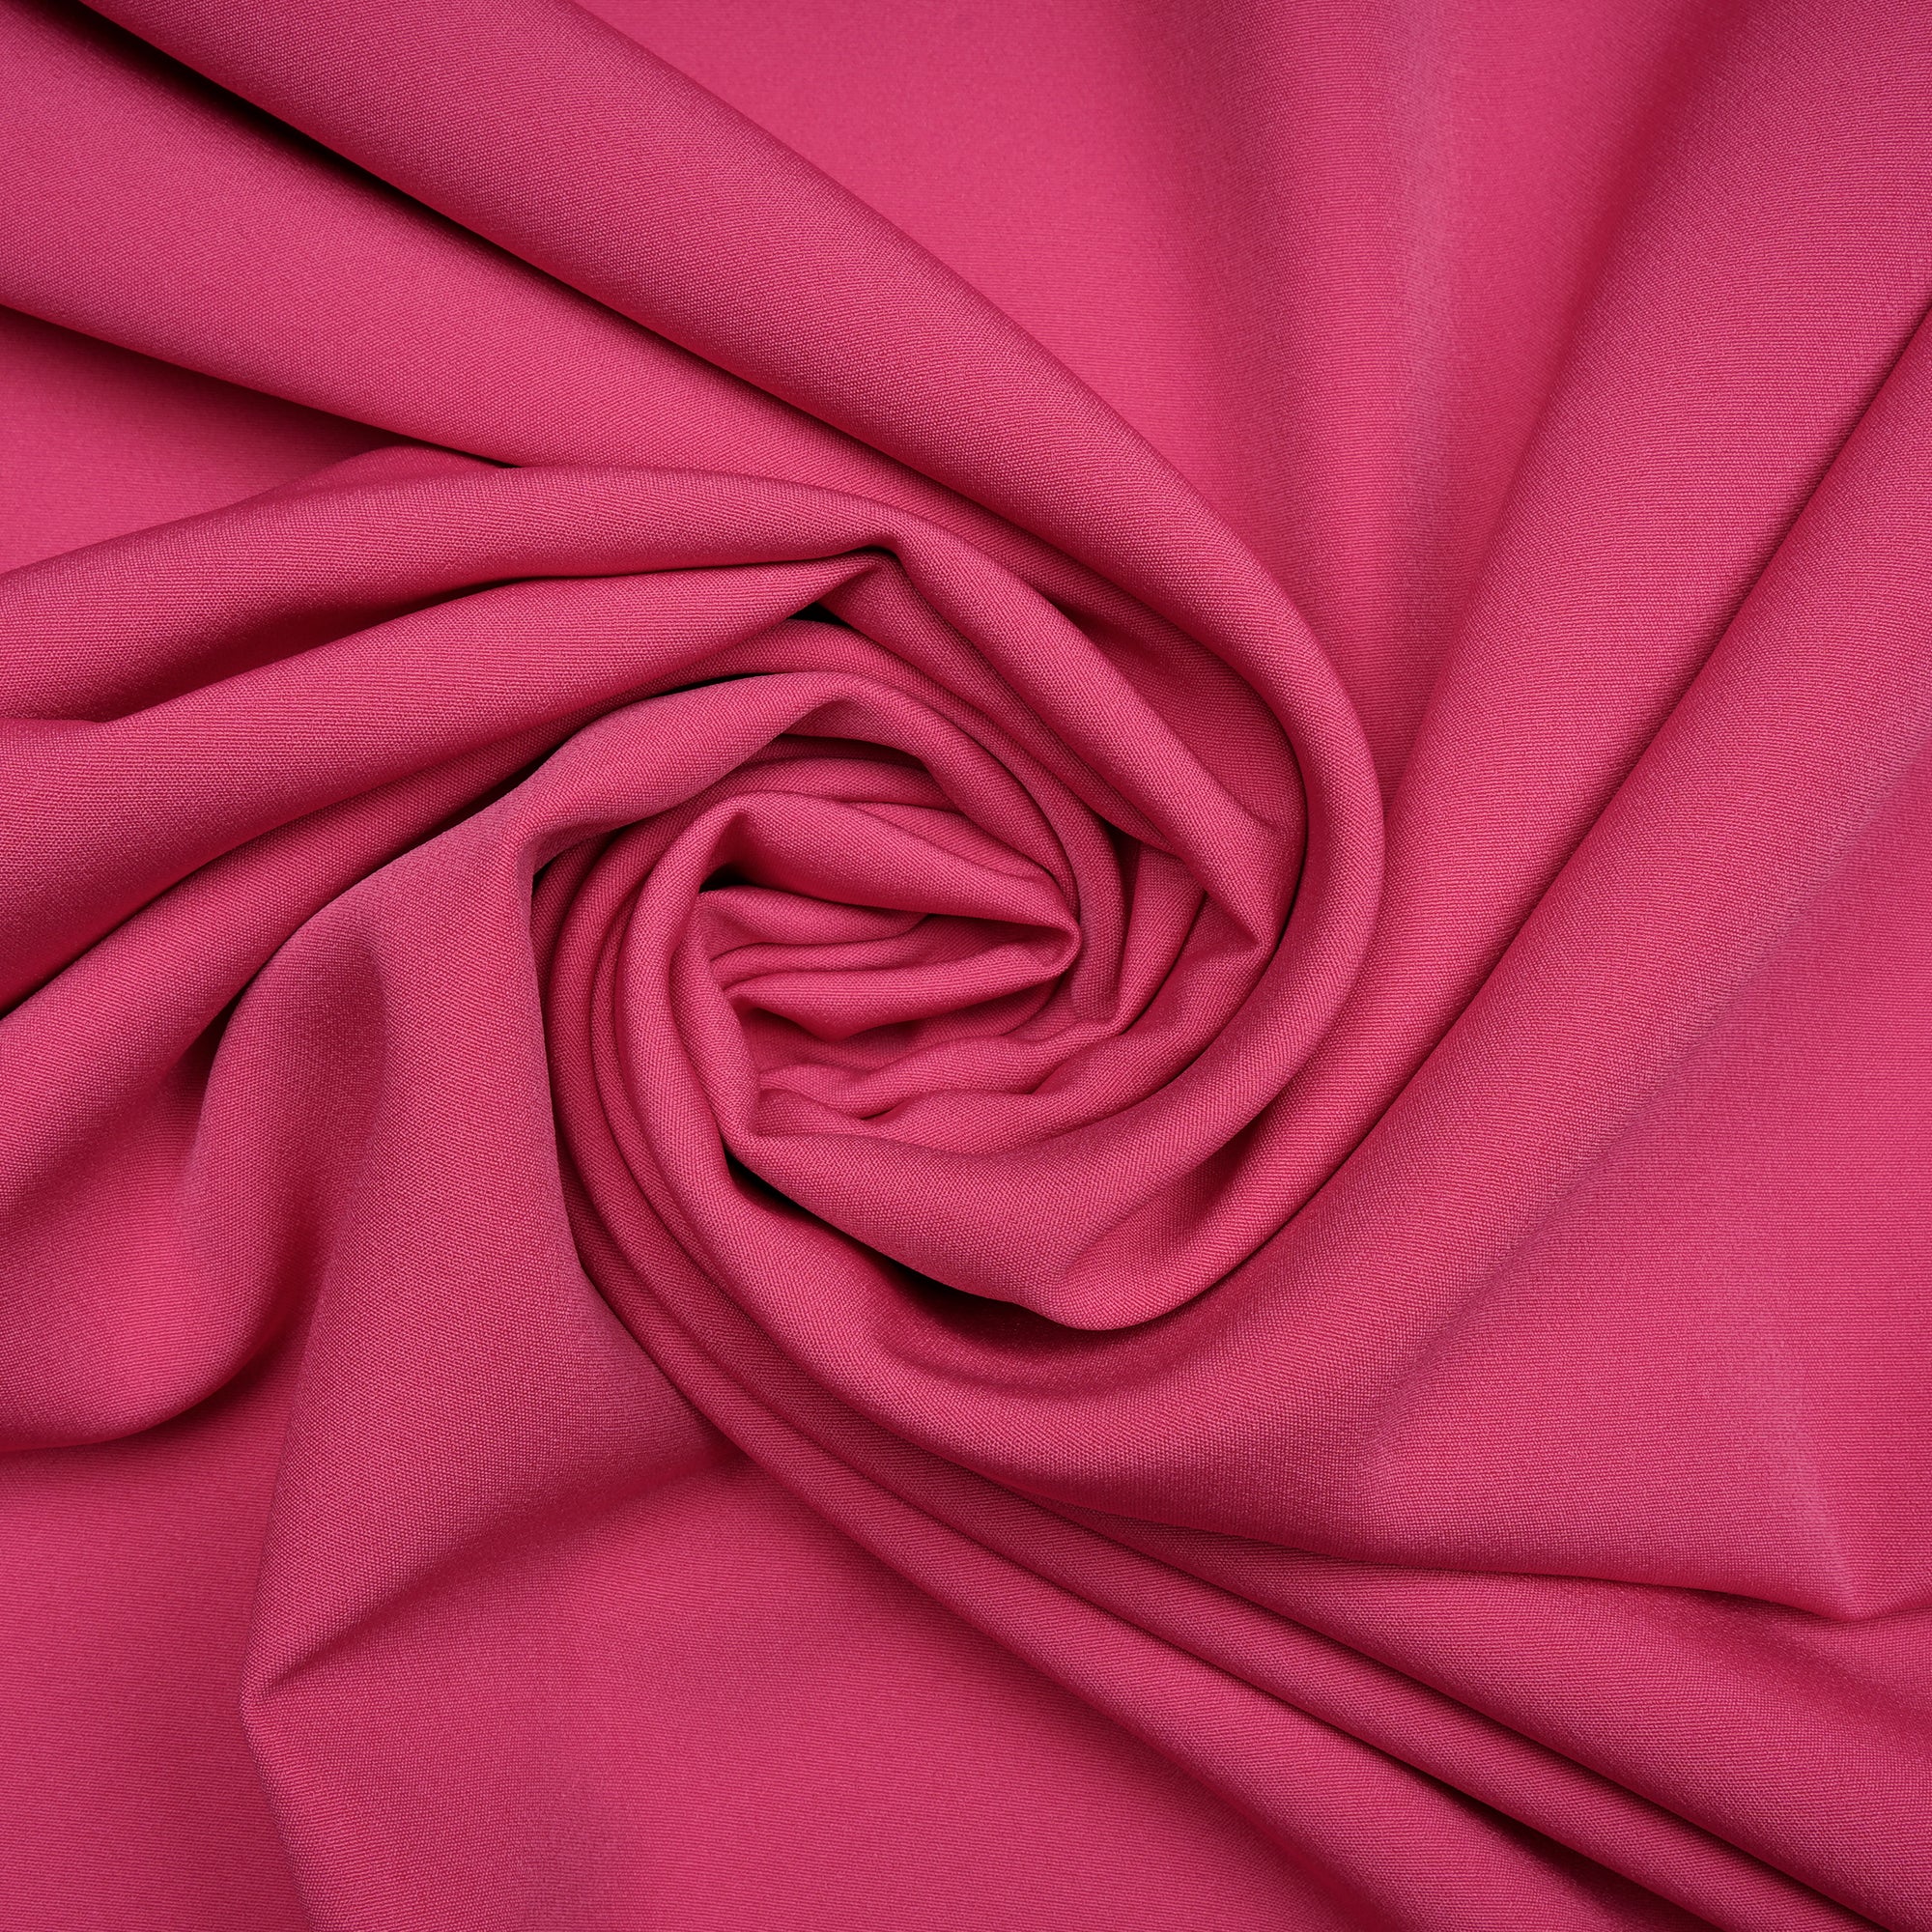 Raspberry Sorbet Solid Dyed Imported Banana Crepe Fabric (60" Width)